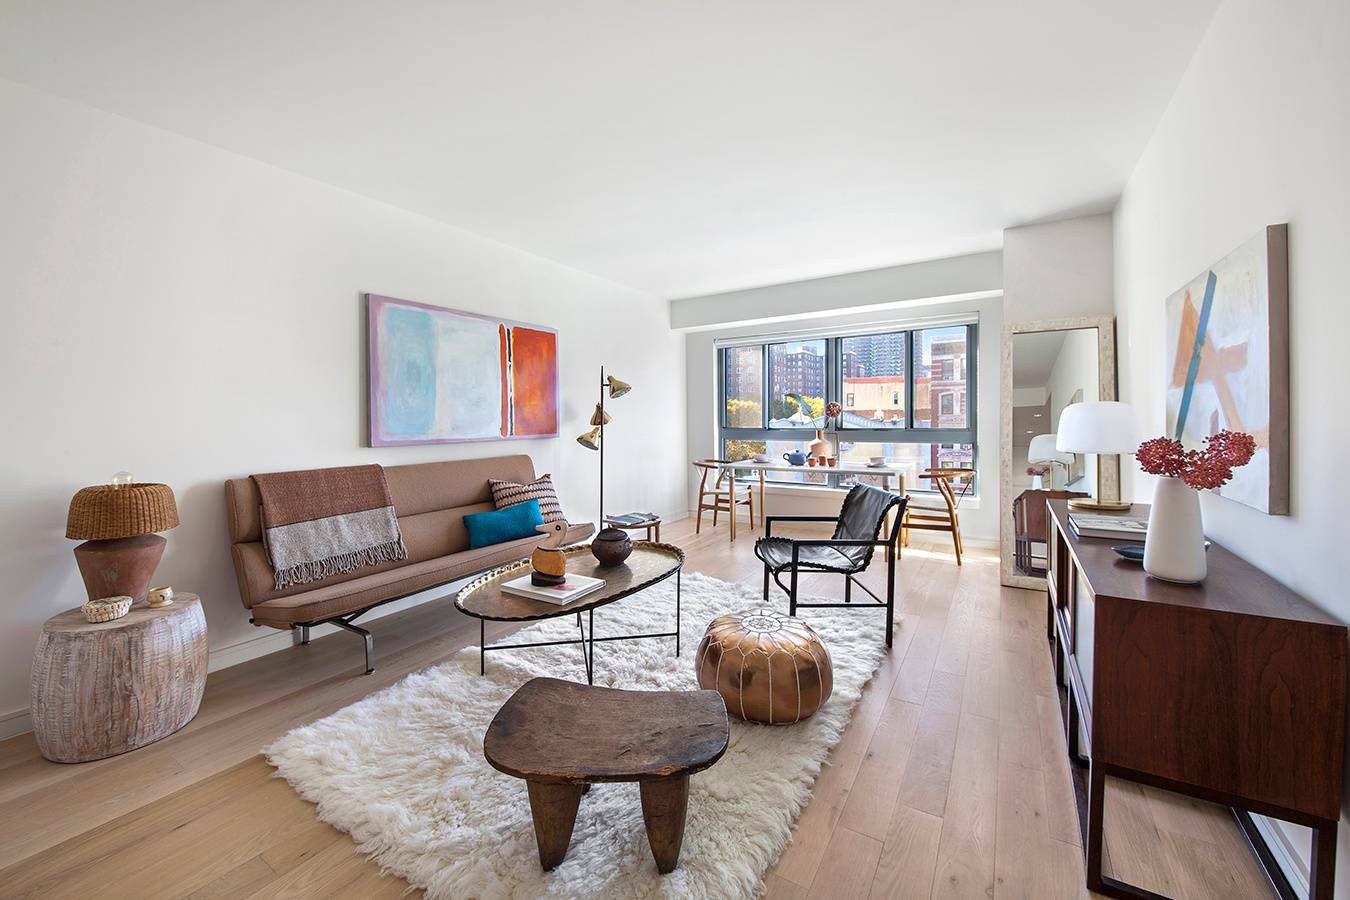 Split Two Bed Two Bath in a Brand New Luxury Condo in Harlem!